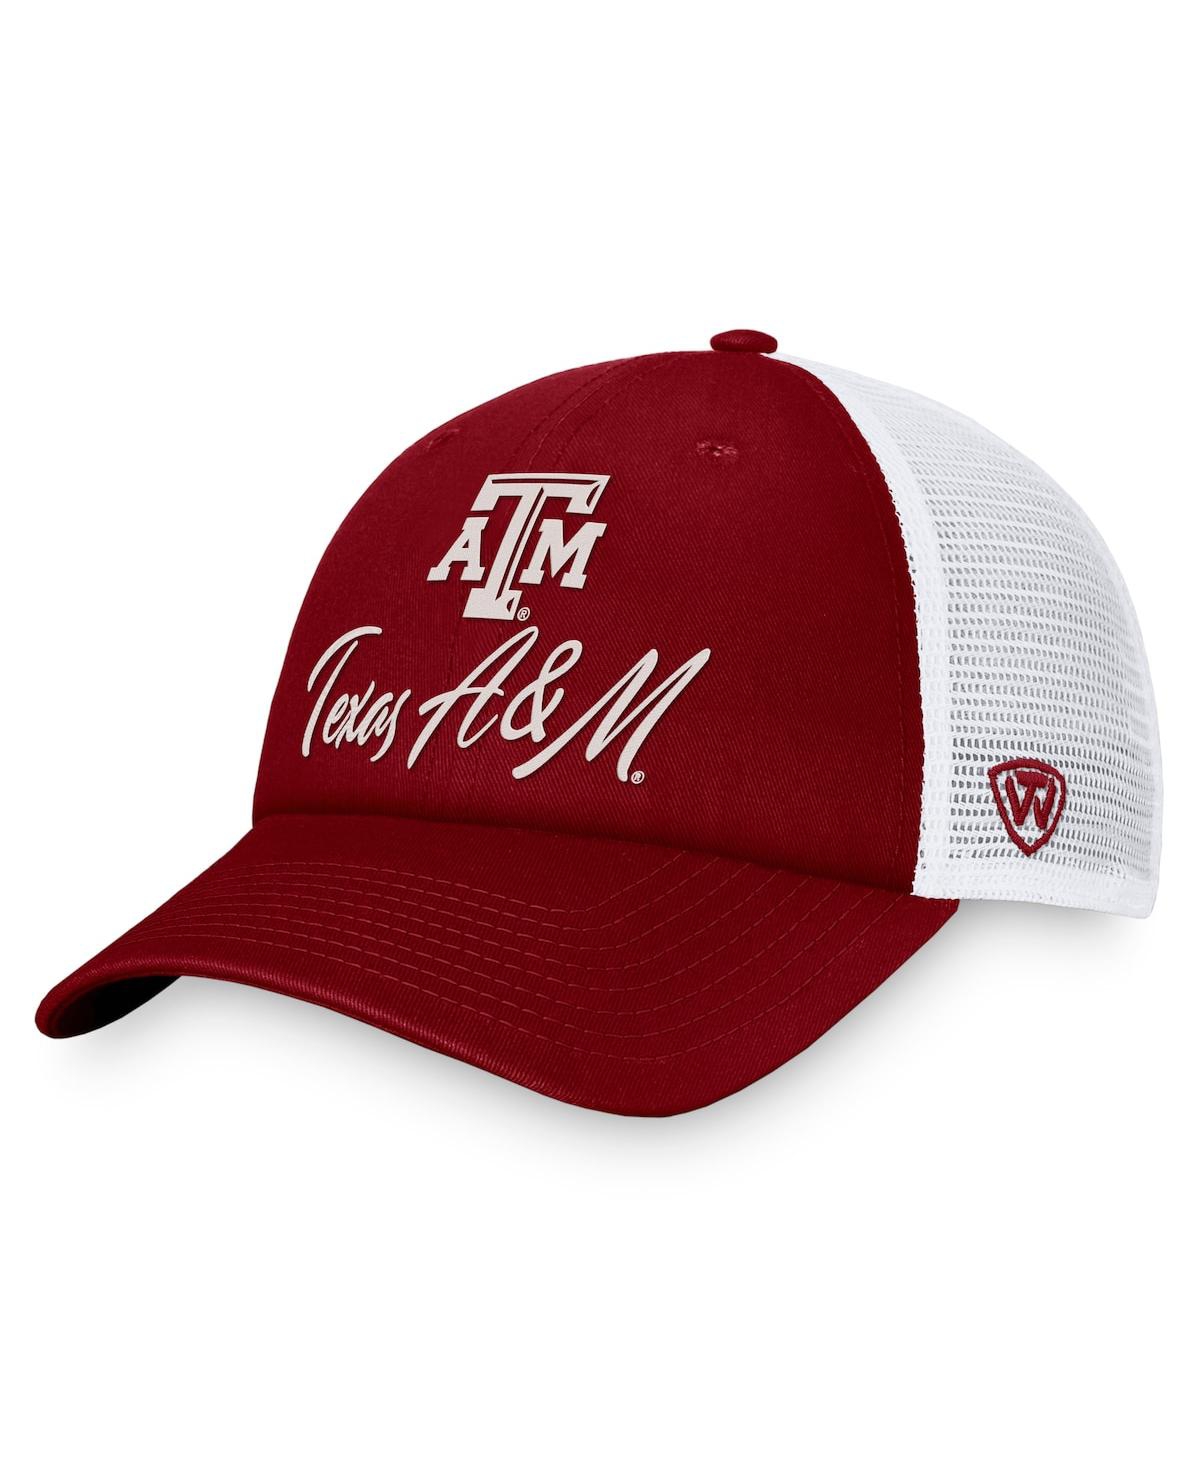 Women's Top of the World Maroon, White Texas A&M Aggies Charm Trucker Adjustable Hat - Maroon, White